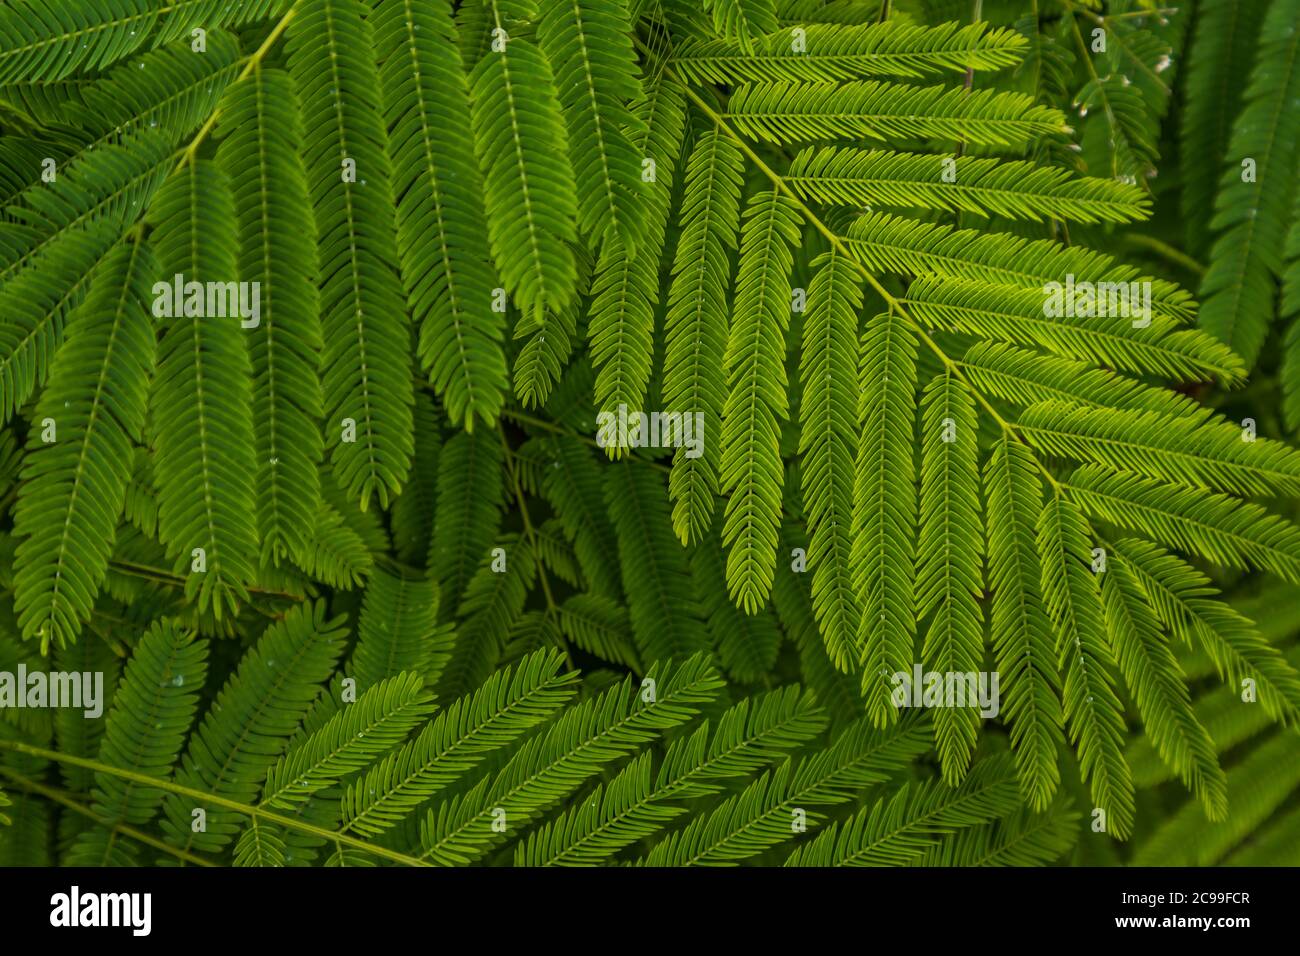 Detail Of Small Green Leaves Of Persian Silk Tree Albizia Julibrissin In Garden No Focus Specifically Stock Photo Alamy